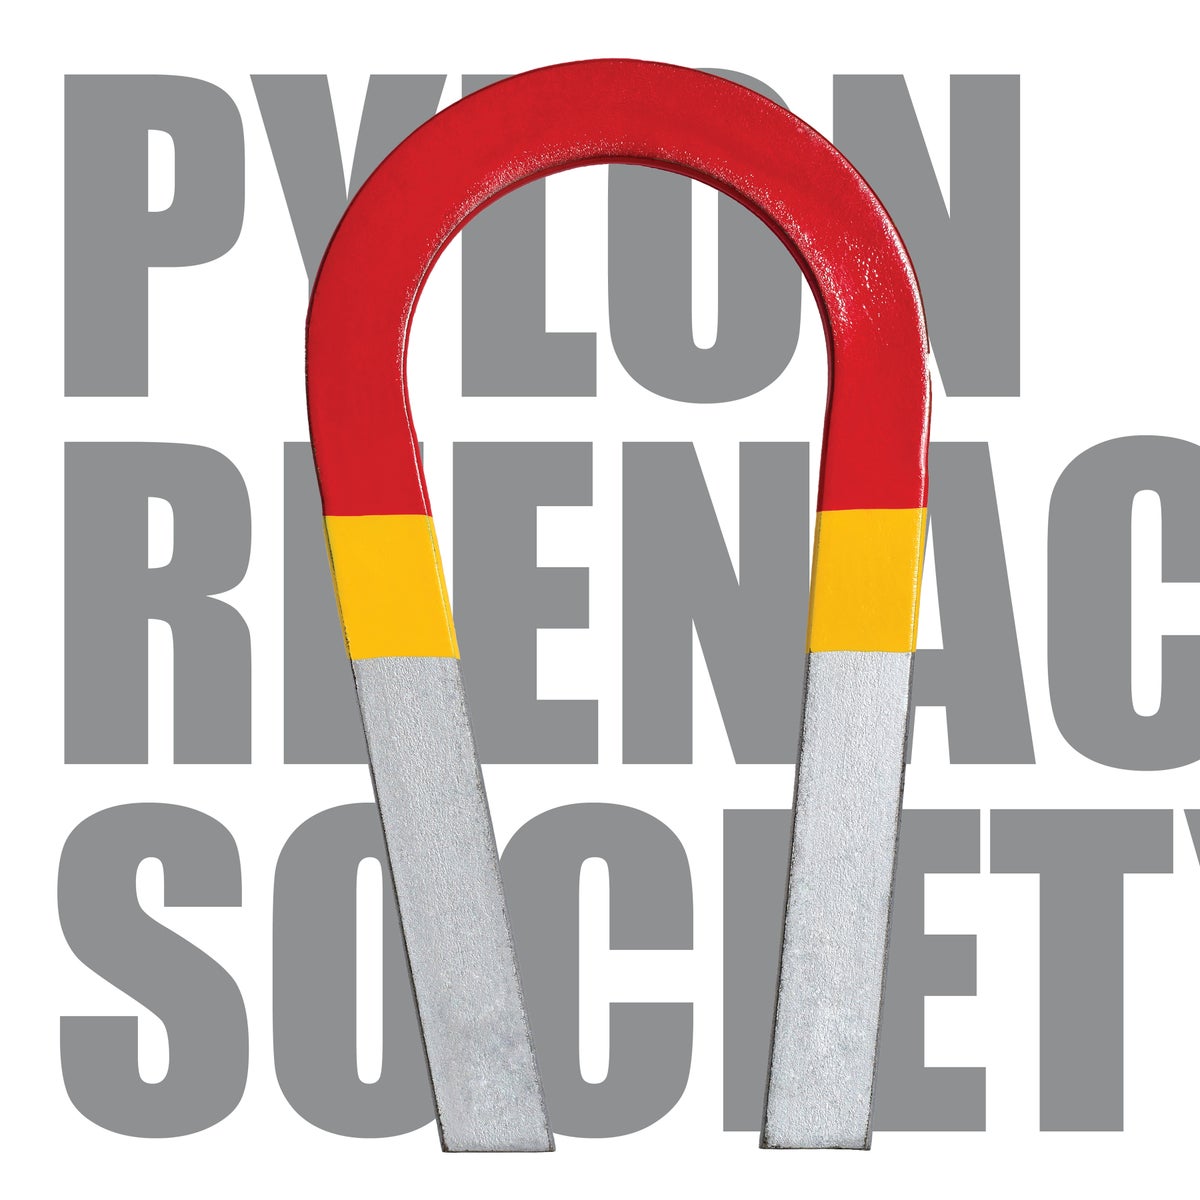 Music Review: New album by Pylon Reenactment Society revives Pylon’s style of funky art punk